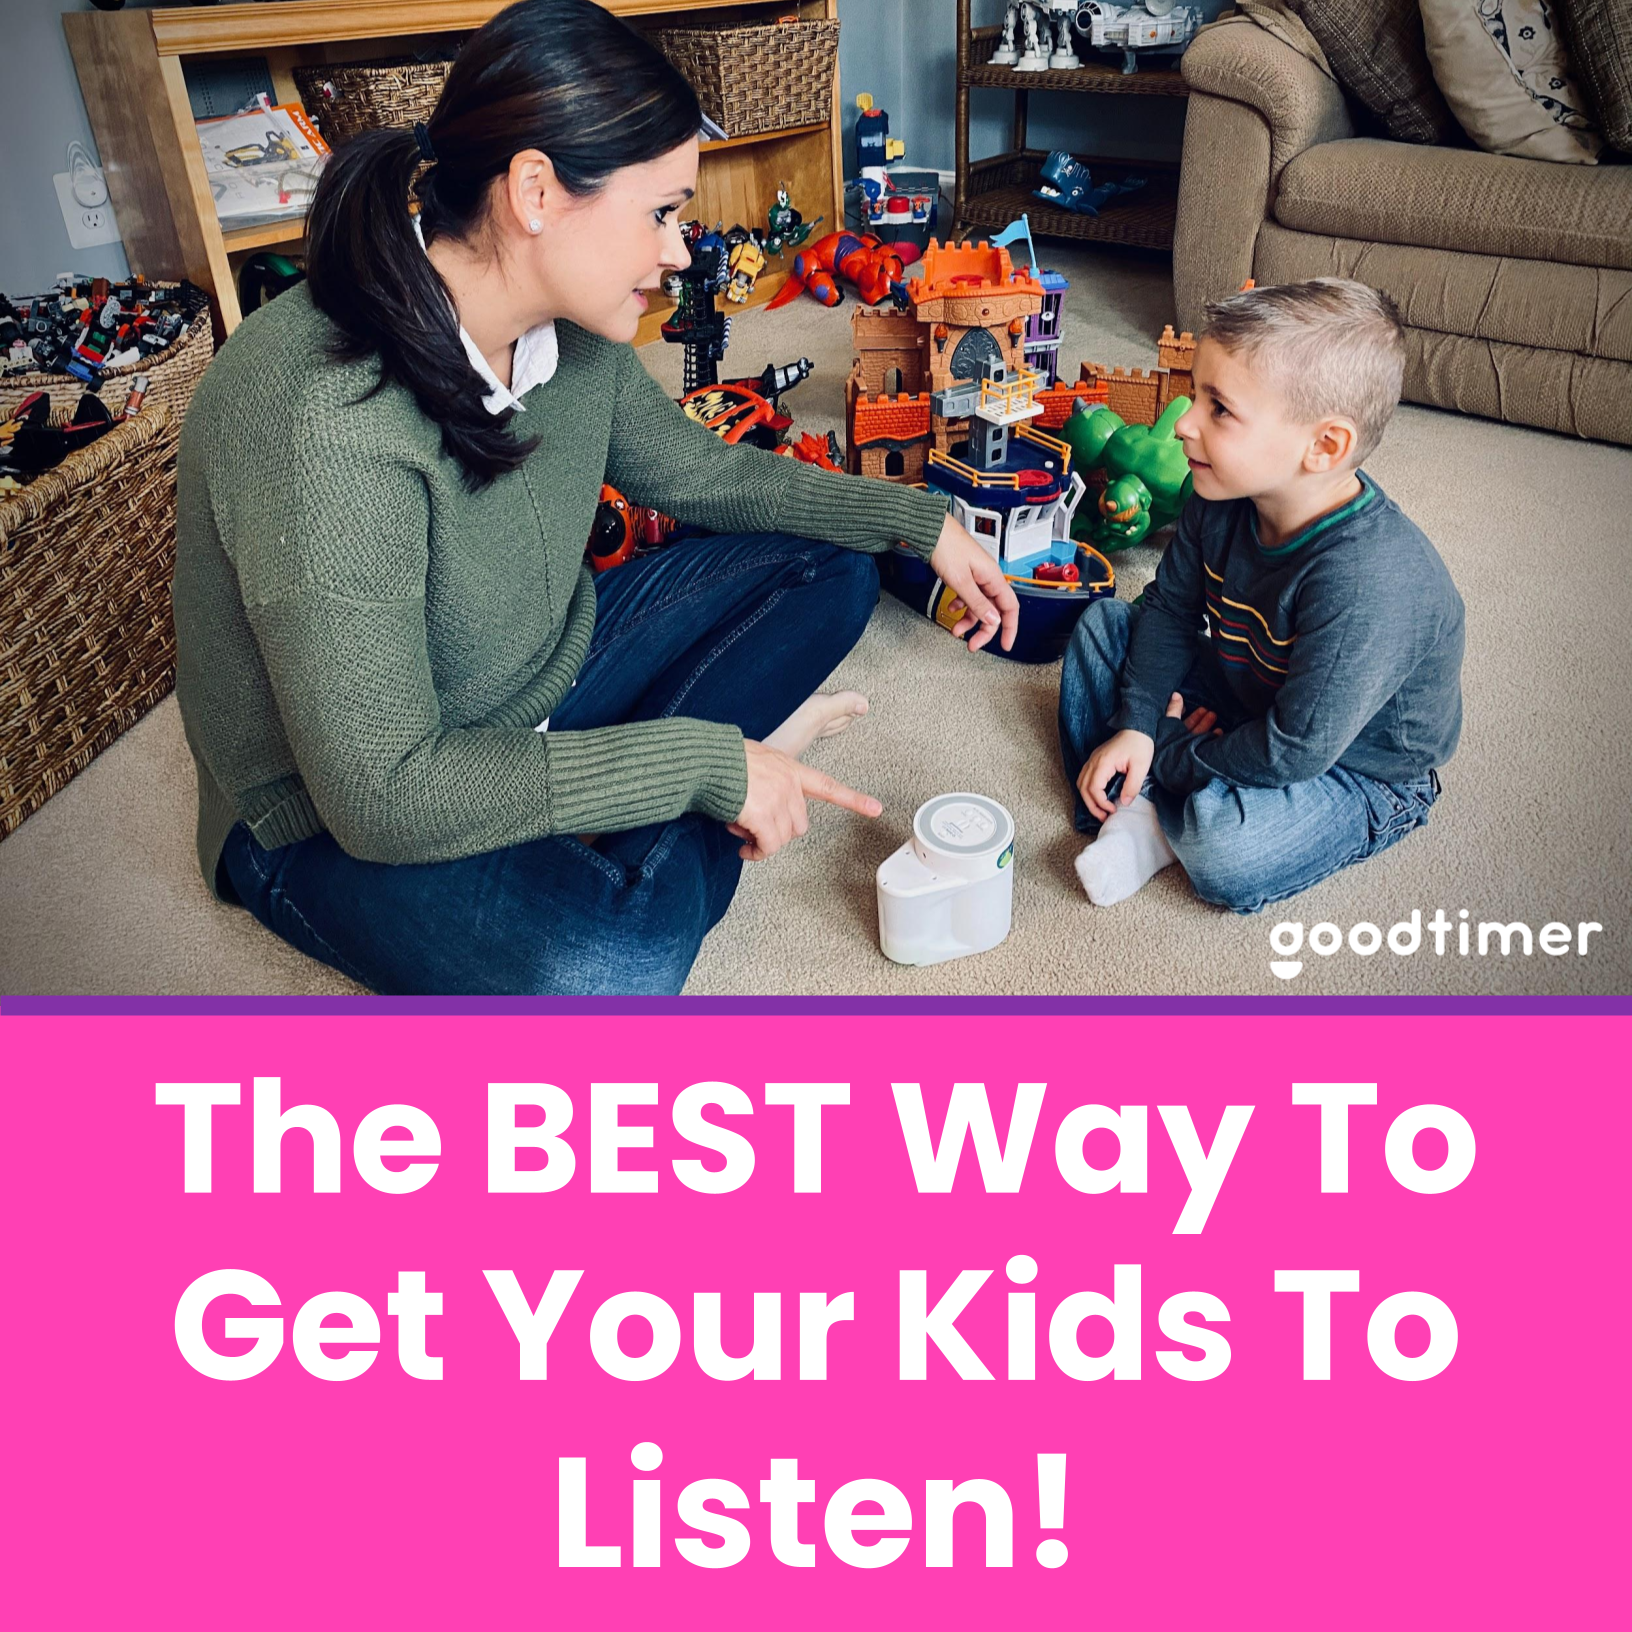 The BEST Way To Get Your Kids to Listen!